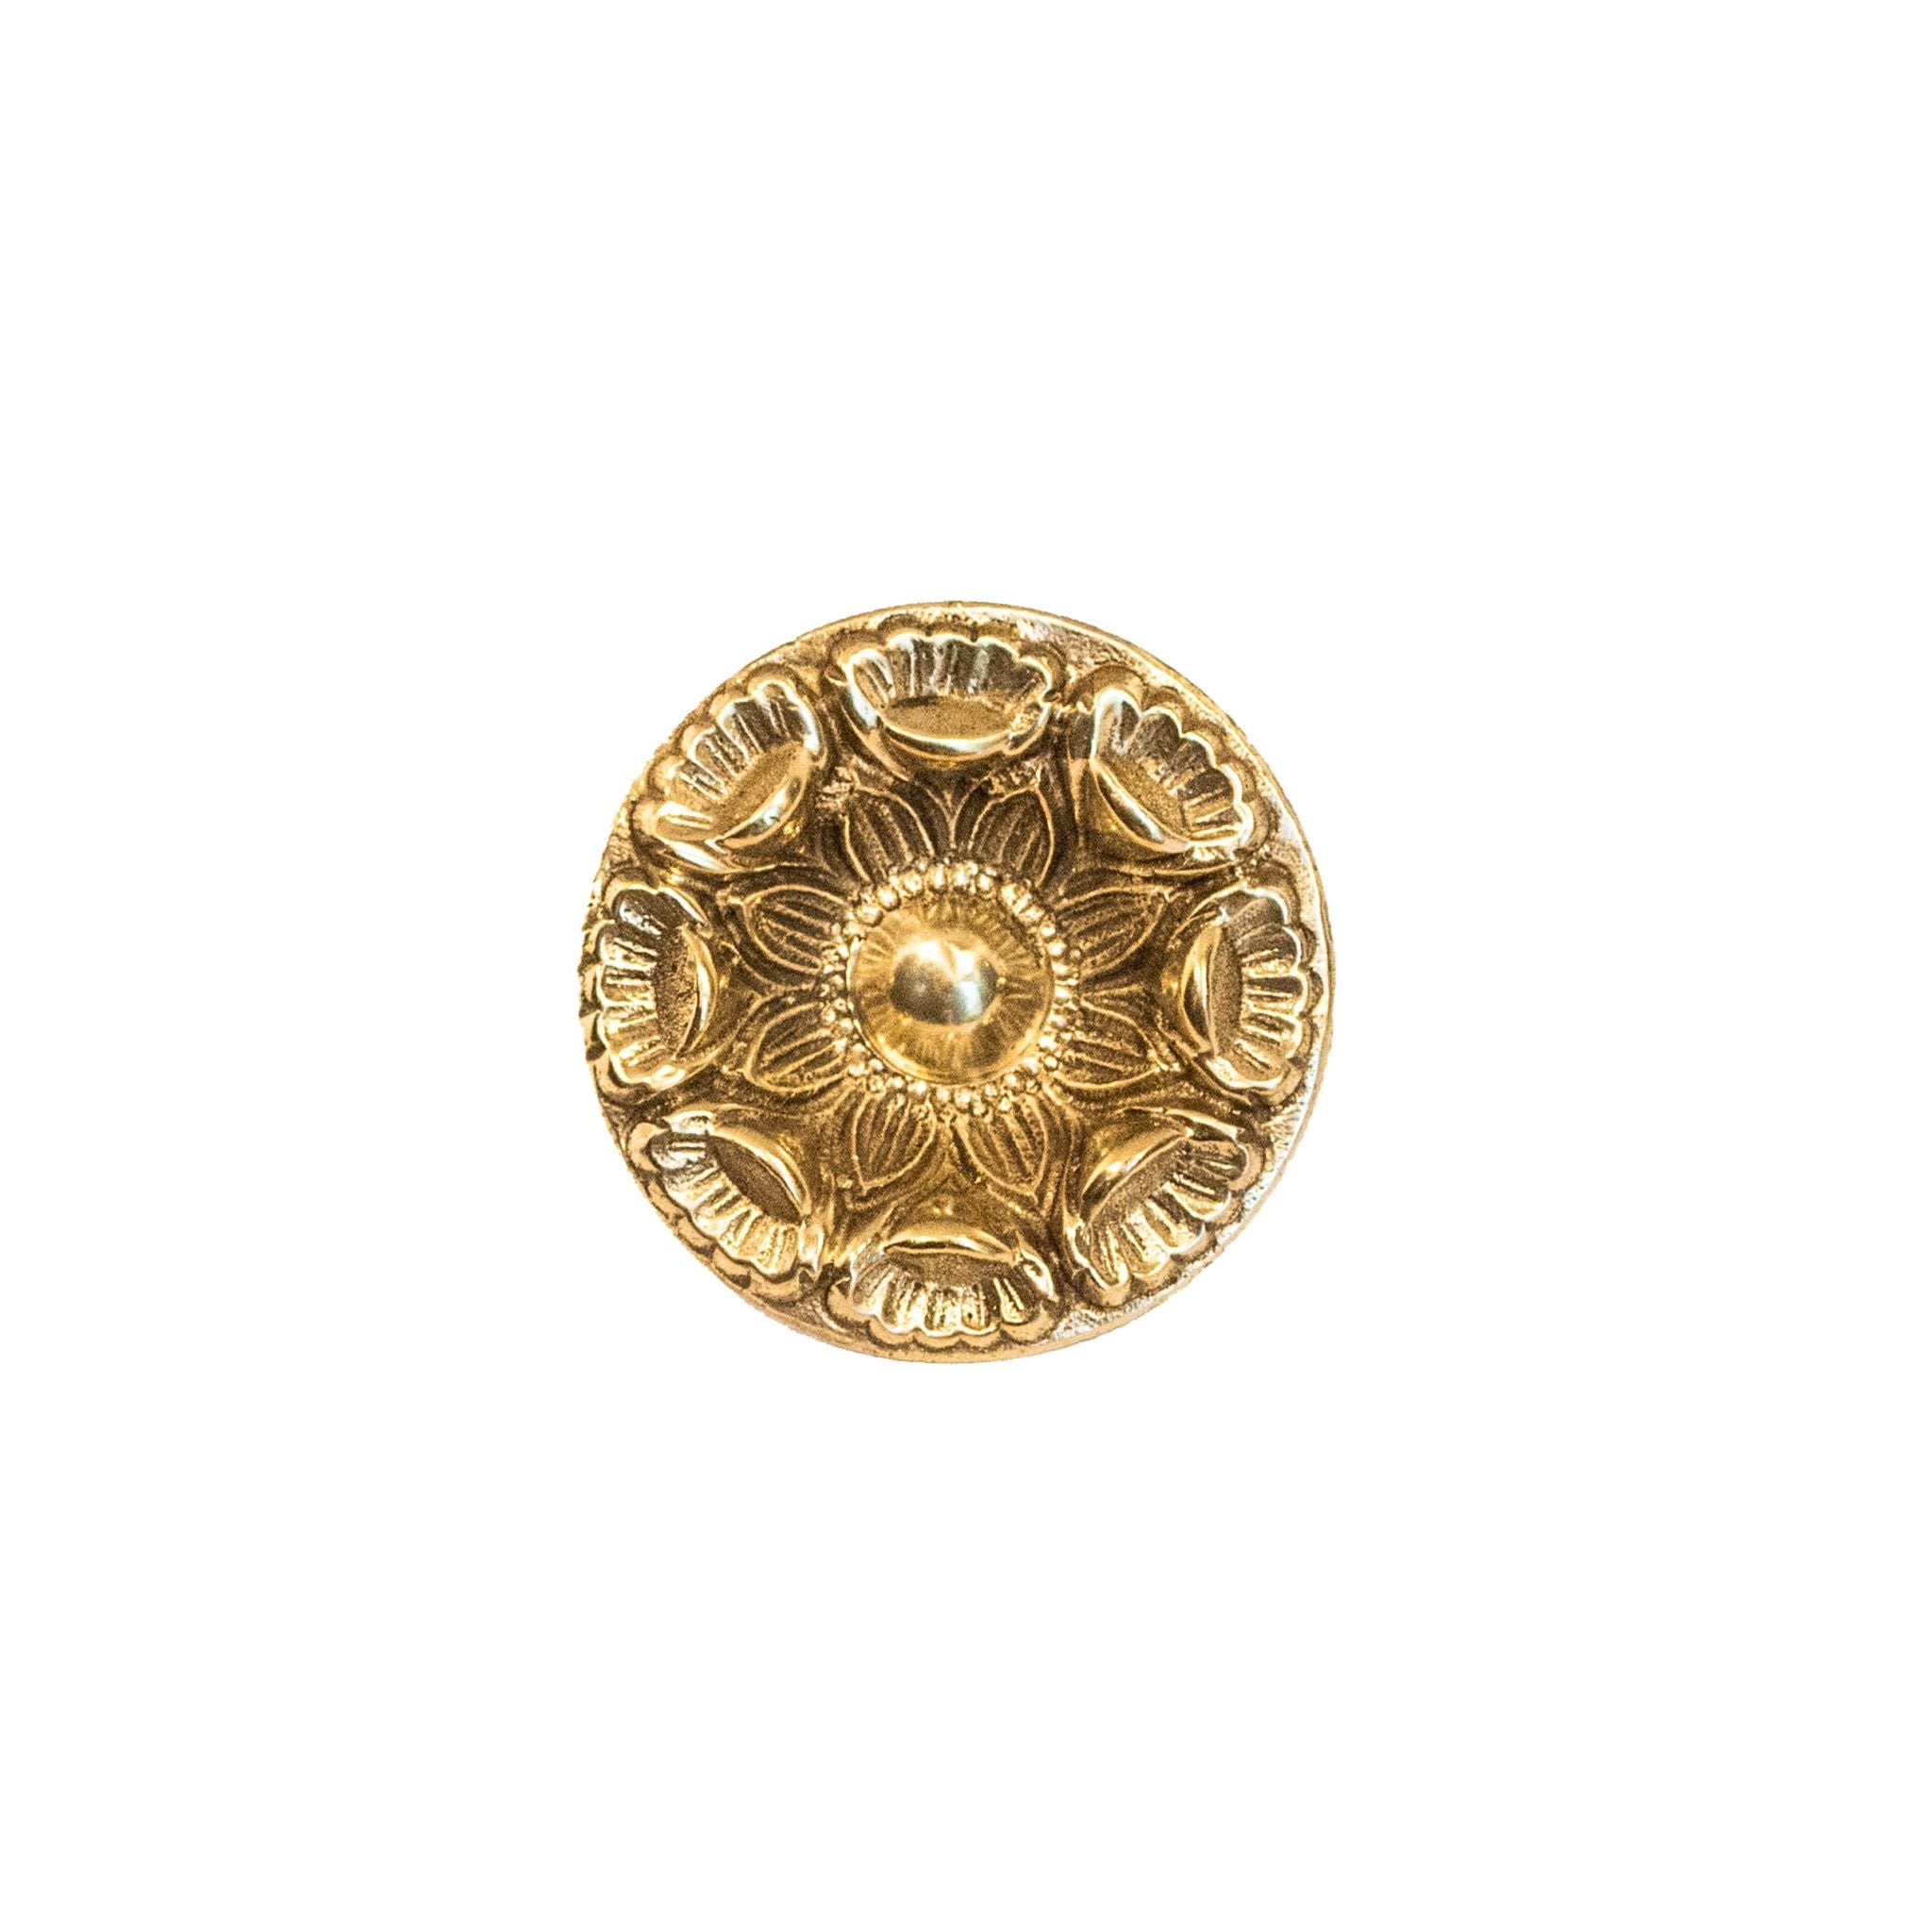 Novecento Oslo Brass Knob: A circular brass knob featuring a flower-shaped decoration, perfect for adding natural elegance to your décor.